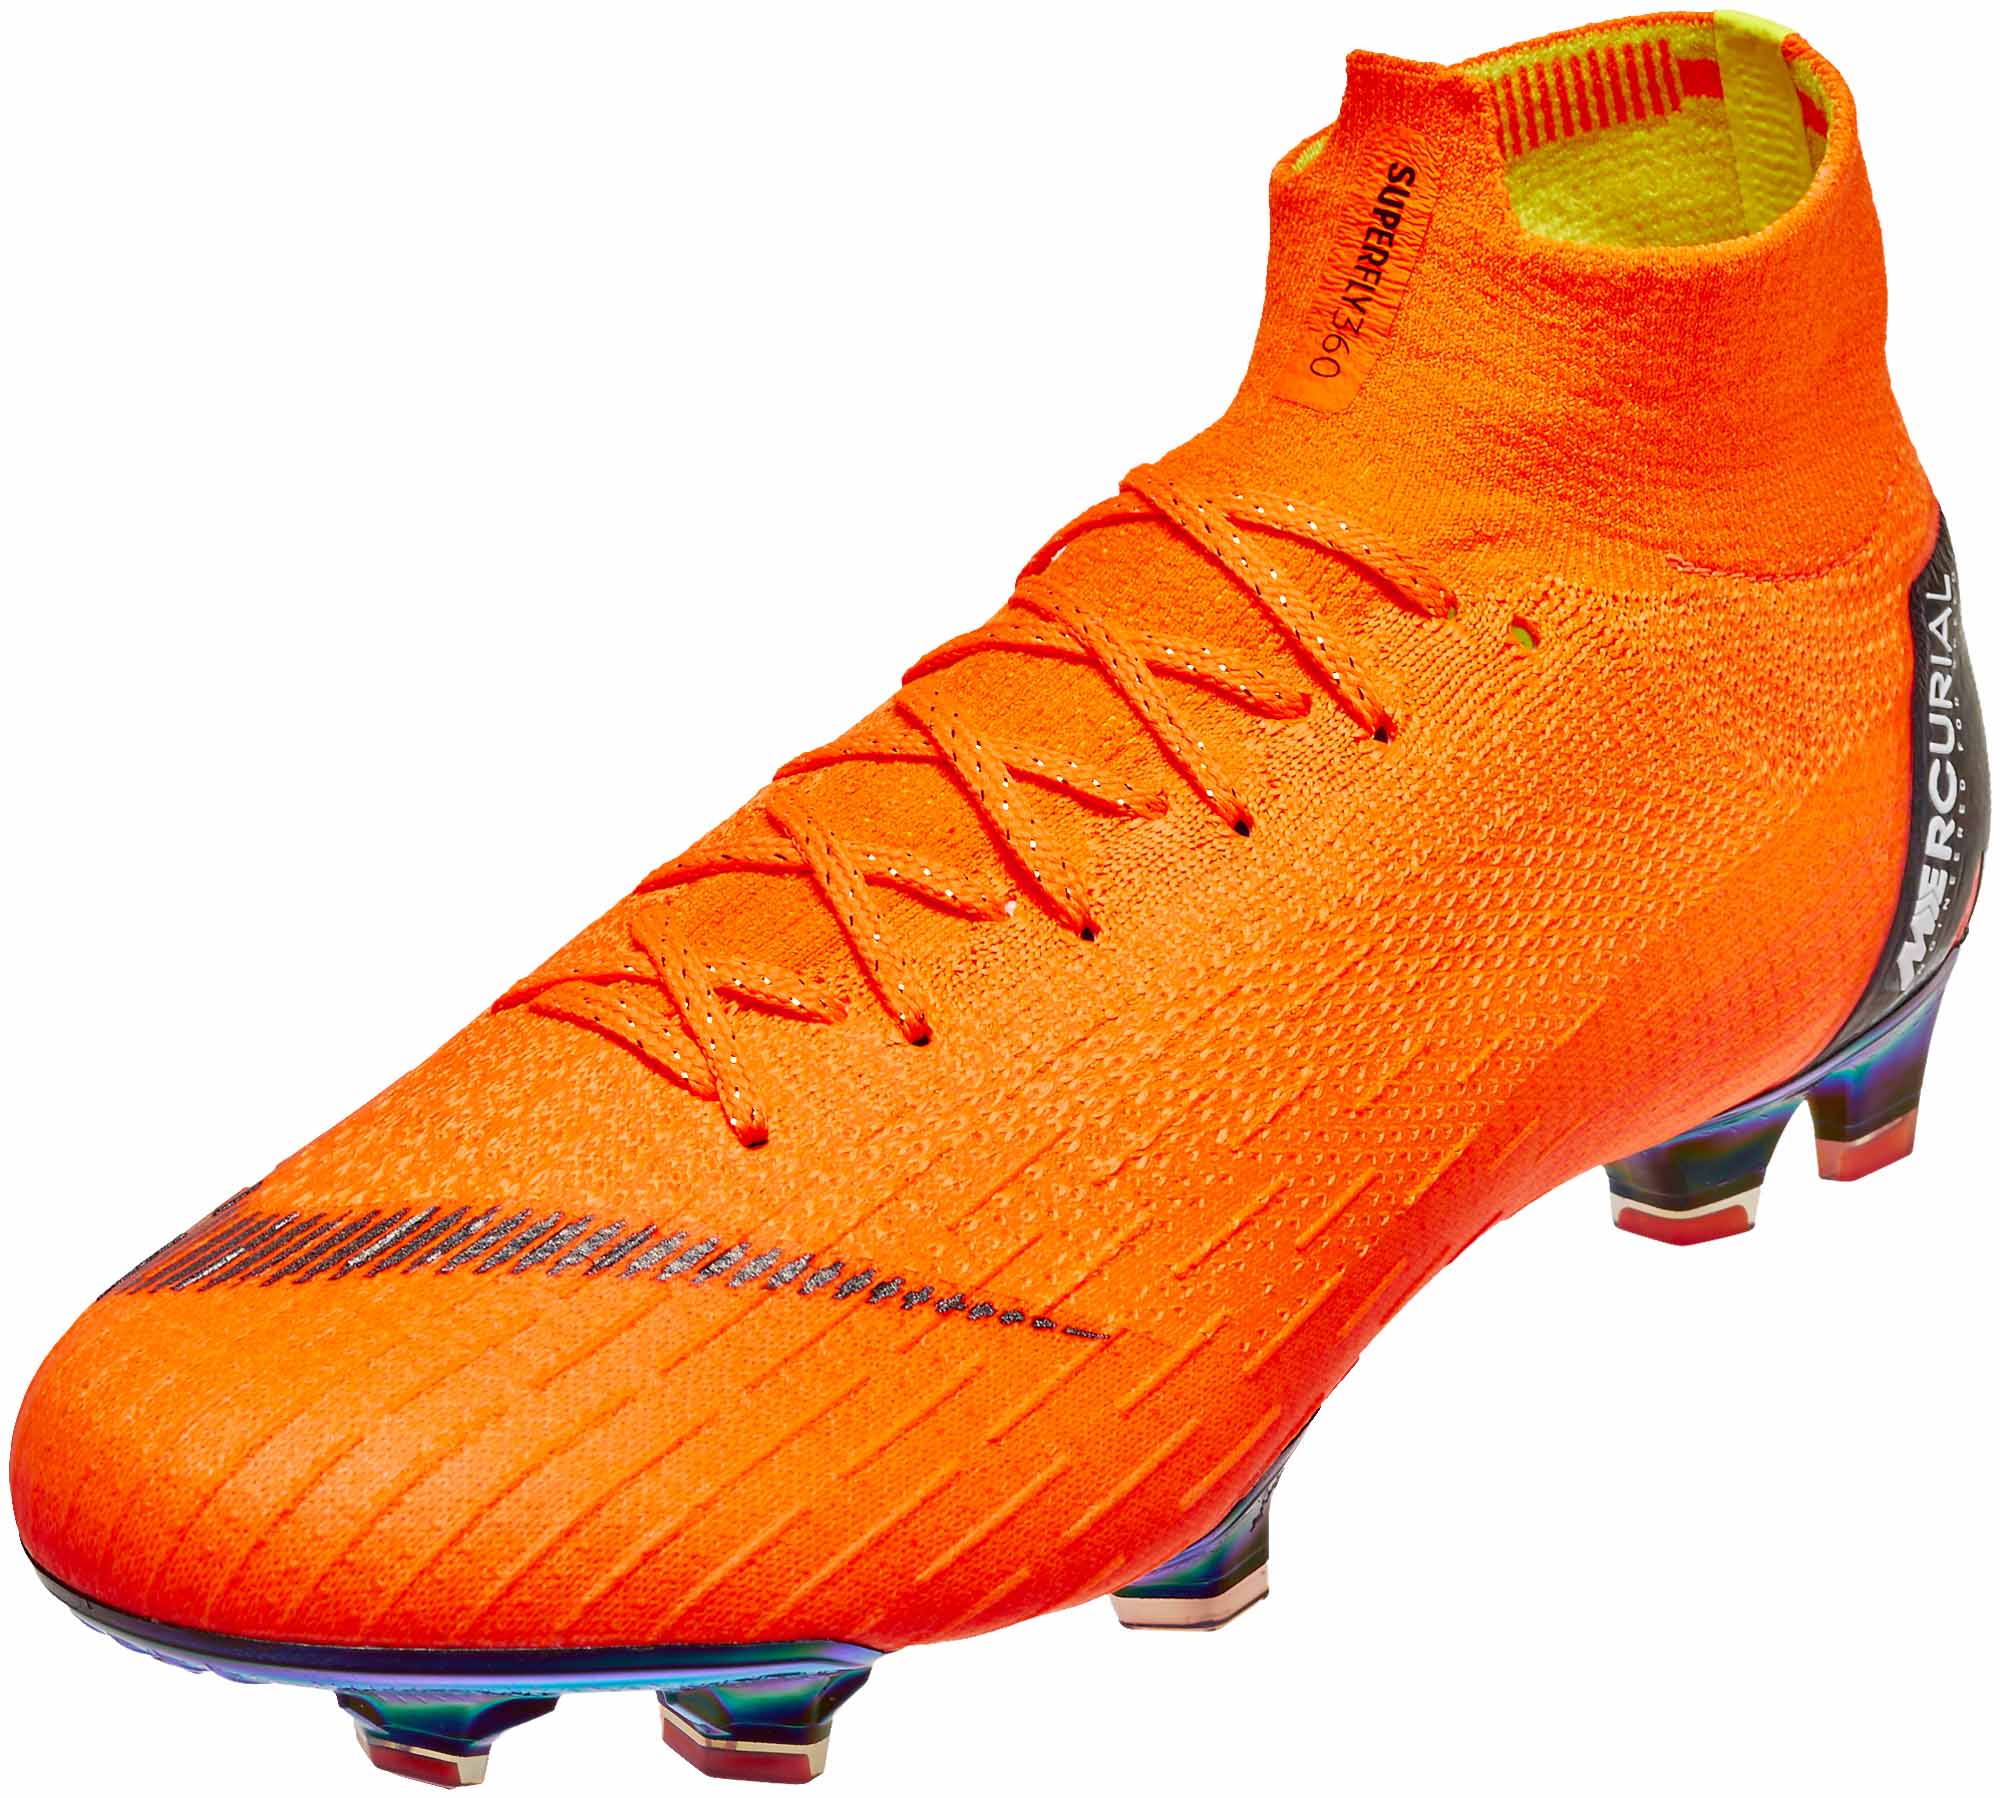 Nike Superfly 6 Elite FG Soccer Cleats 